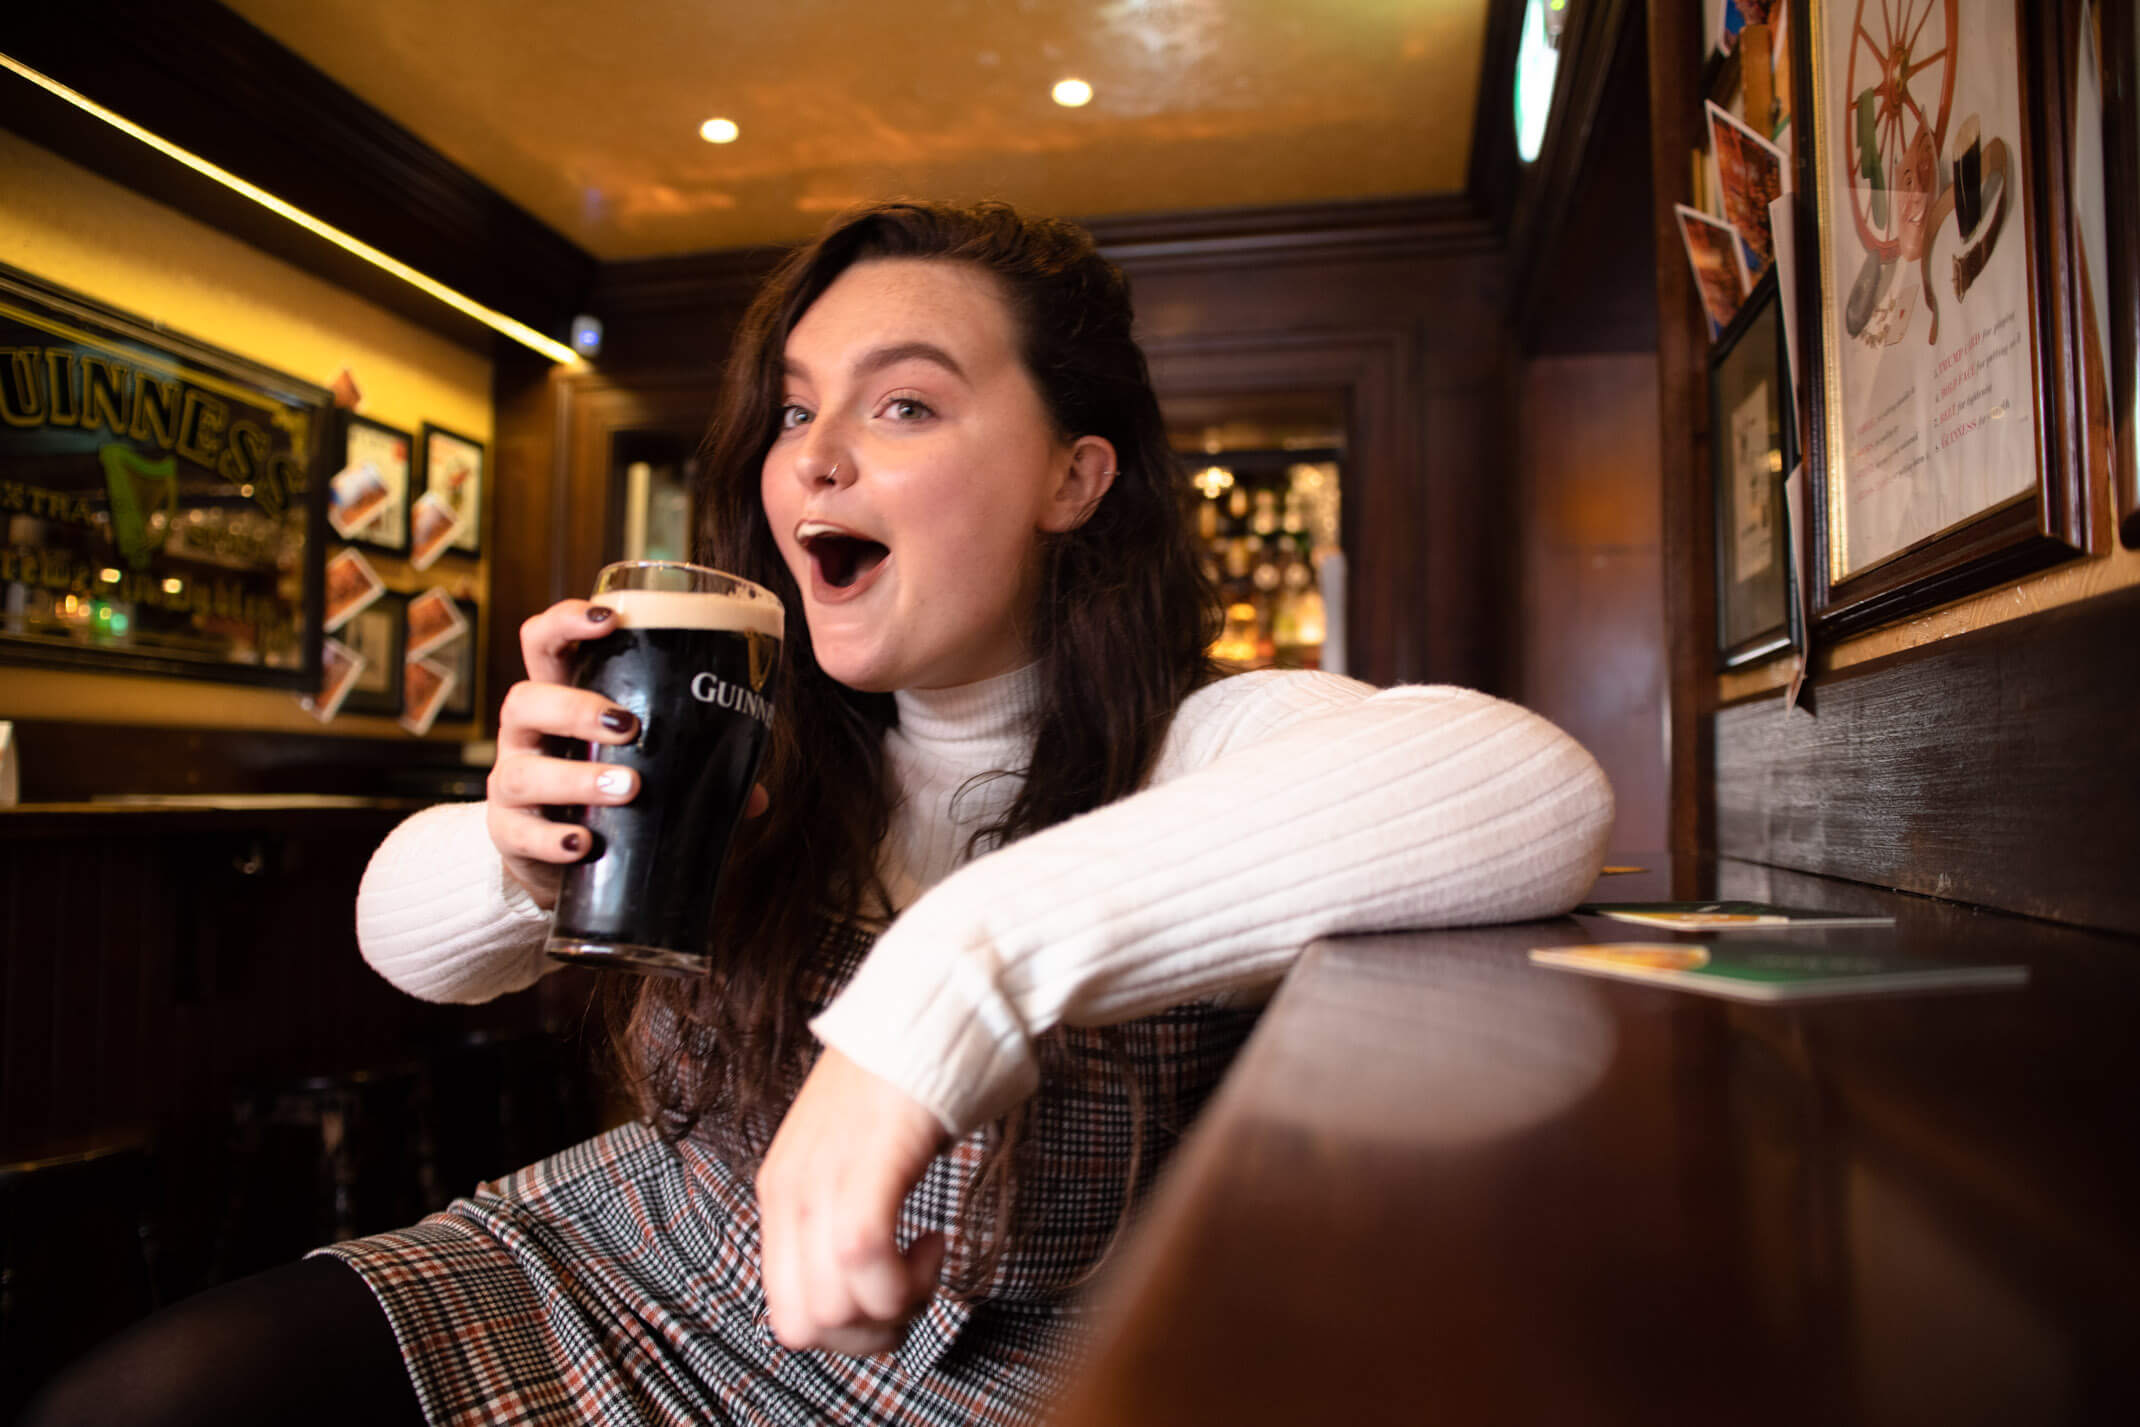 15 OF THE BEST THINGS TO DO IN DUBLIN, IRELAND